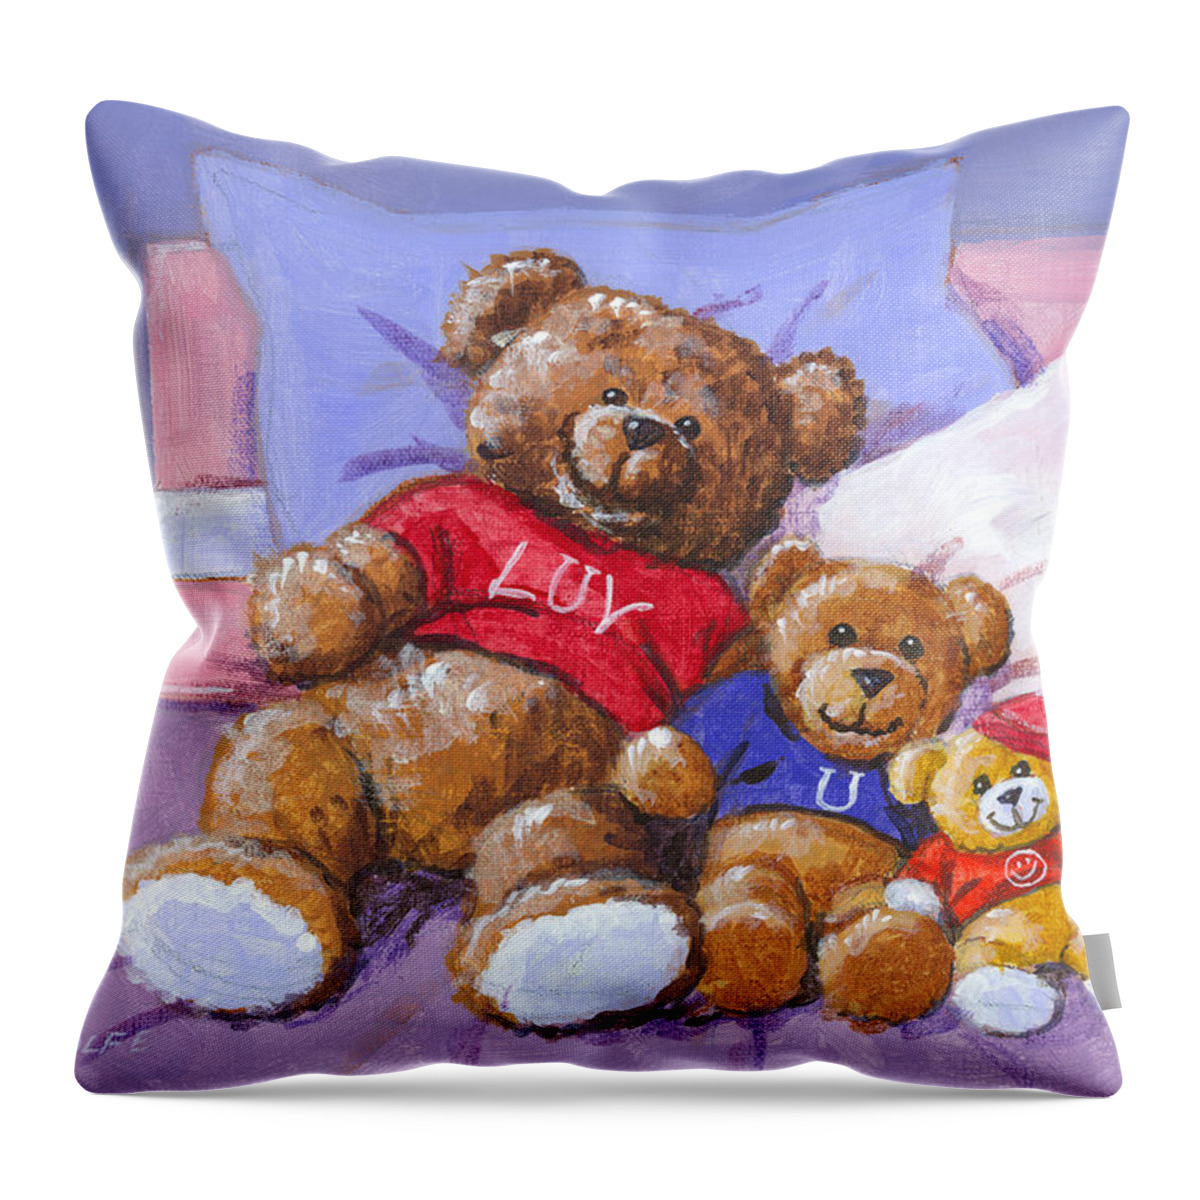 Teddy Throw Pillow featuring the painting Three Amigos Sketch by Richard De Wolfe